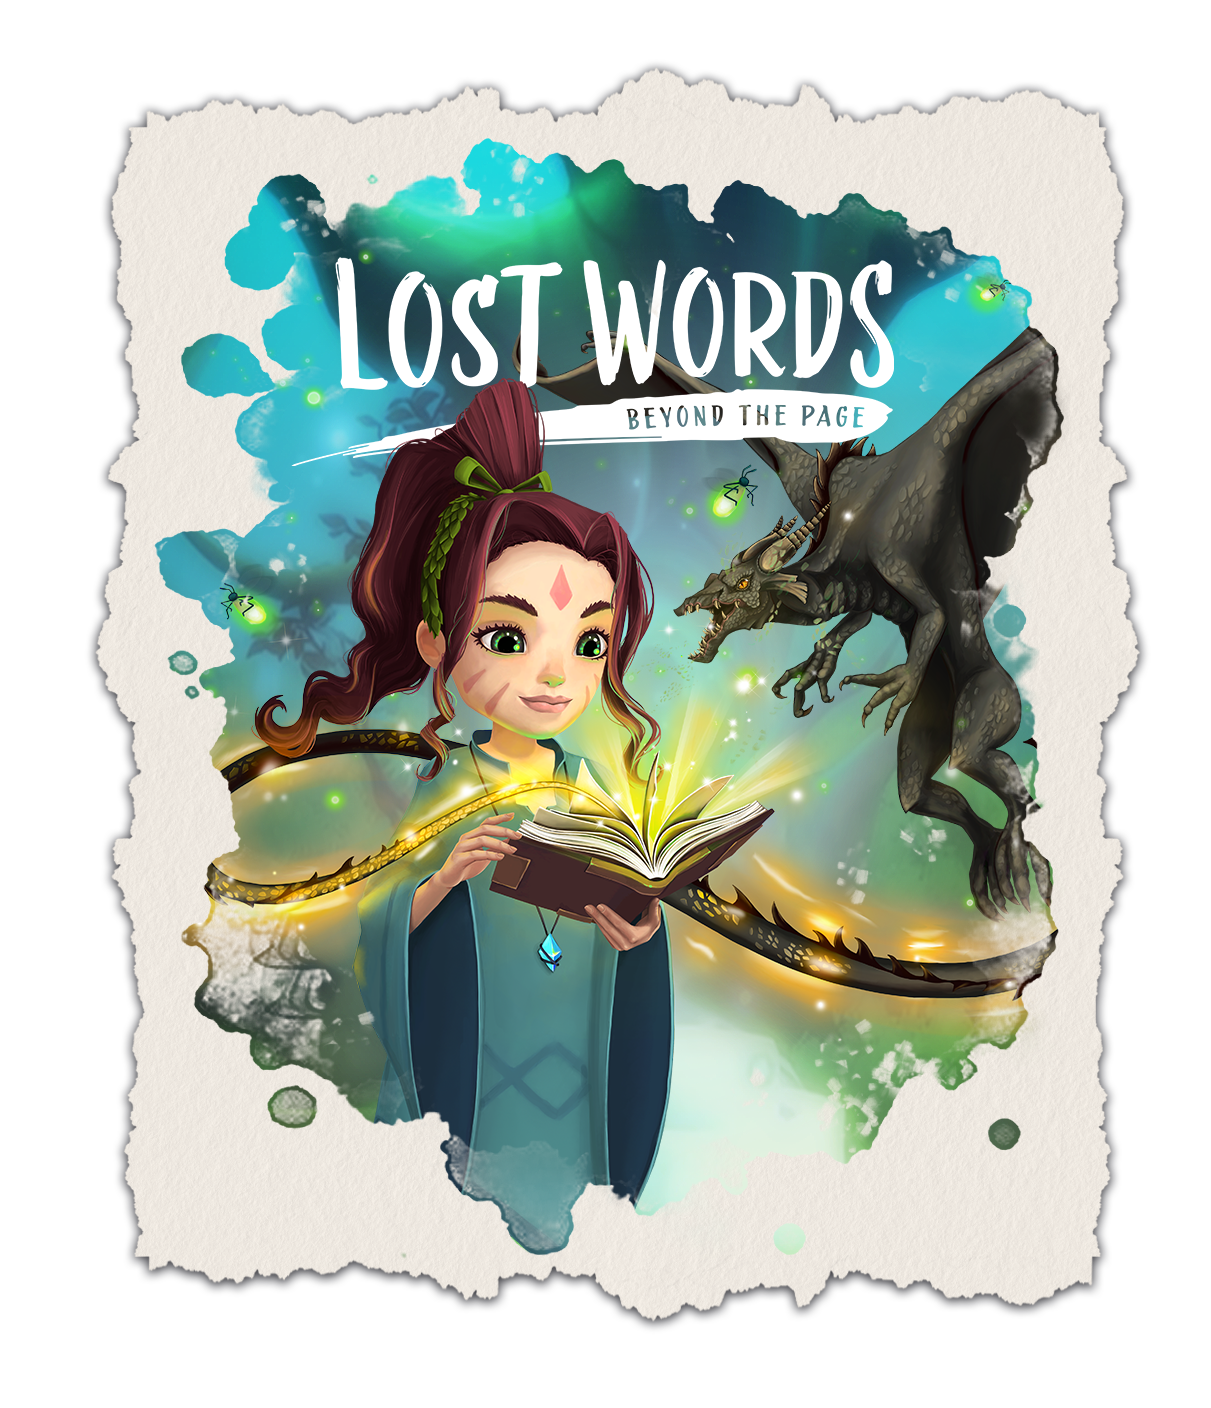 S lost word. Lost Words: Beyond the Page. Lost Words Beyond the Page ps4. Lost Words: Beyond the Page Cover. Книга Beyond the story.